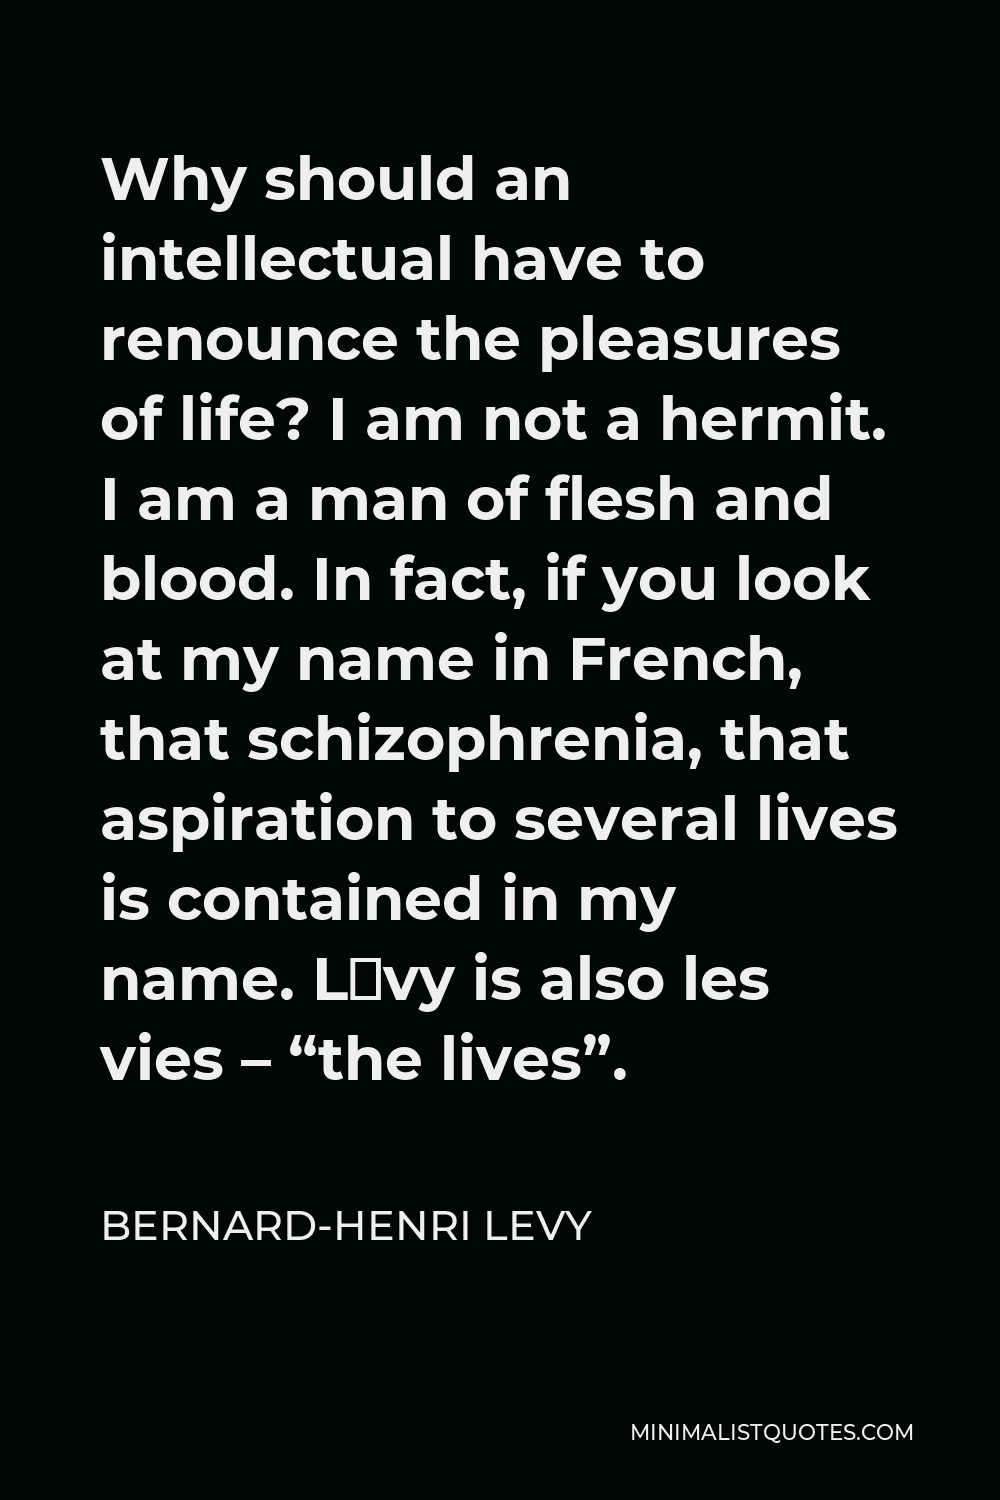 Bernard-Henri Levy Quote - Why should an intellectual have to renounce the pleasures of life? I am not a hermit. I am a man of flesh and blood. In fact, if you look at my name in French, that schizophrenia, that aspiration to several lives is contained in my name. Lévy is also les vies – “the lives”.